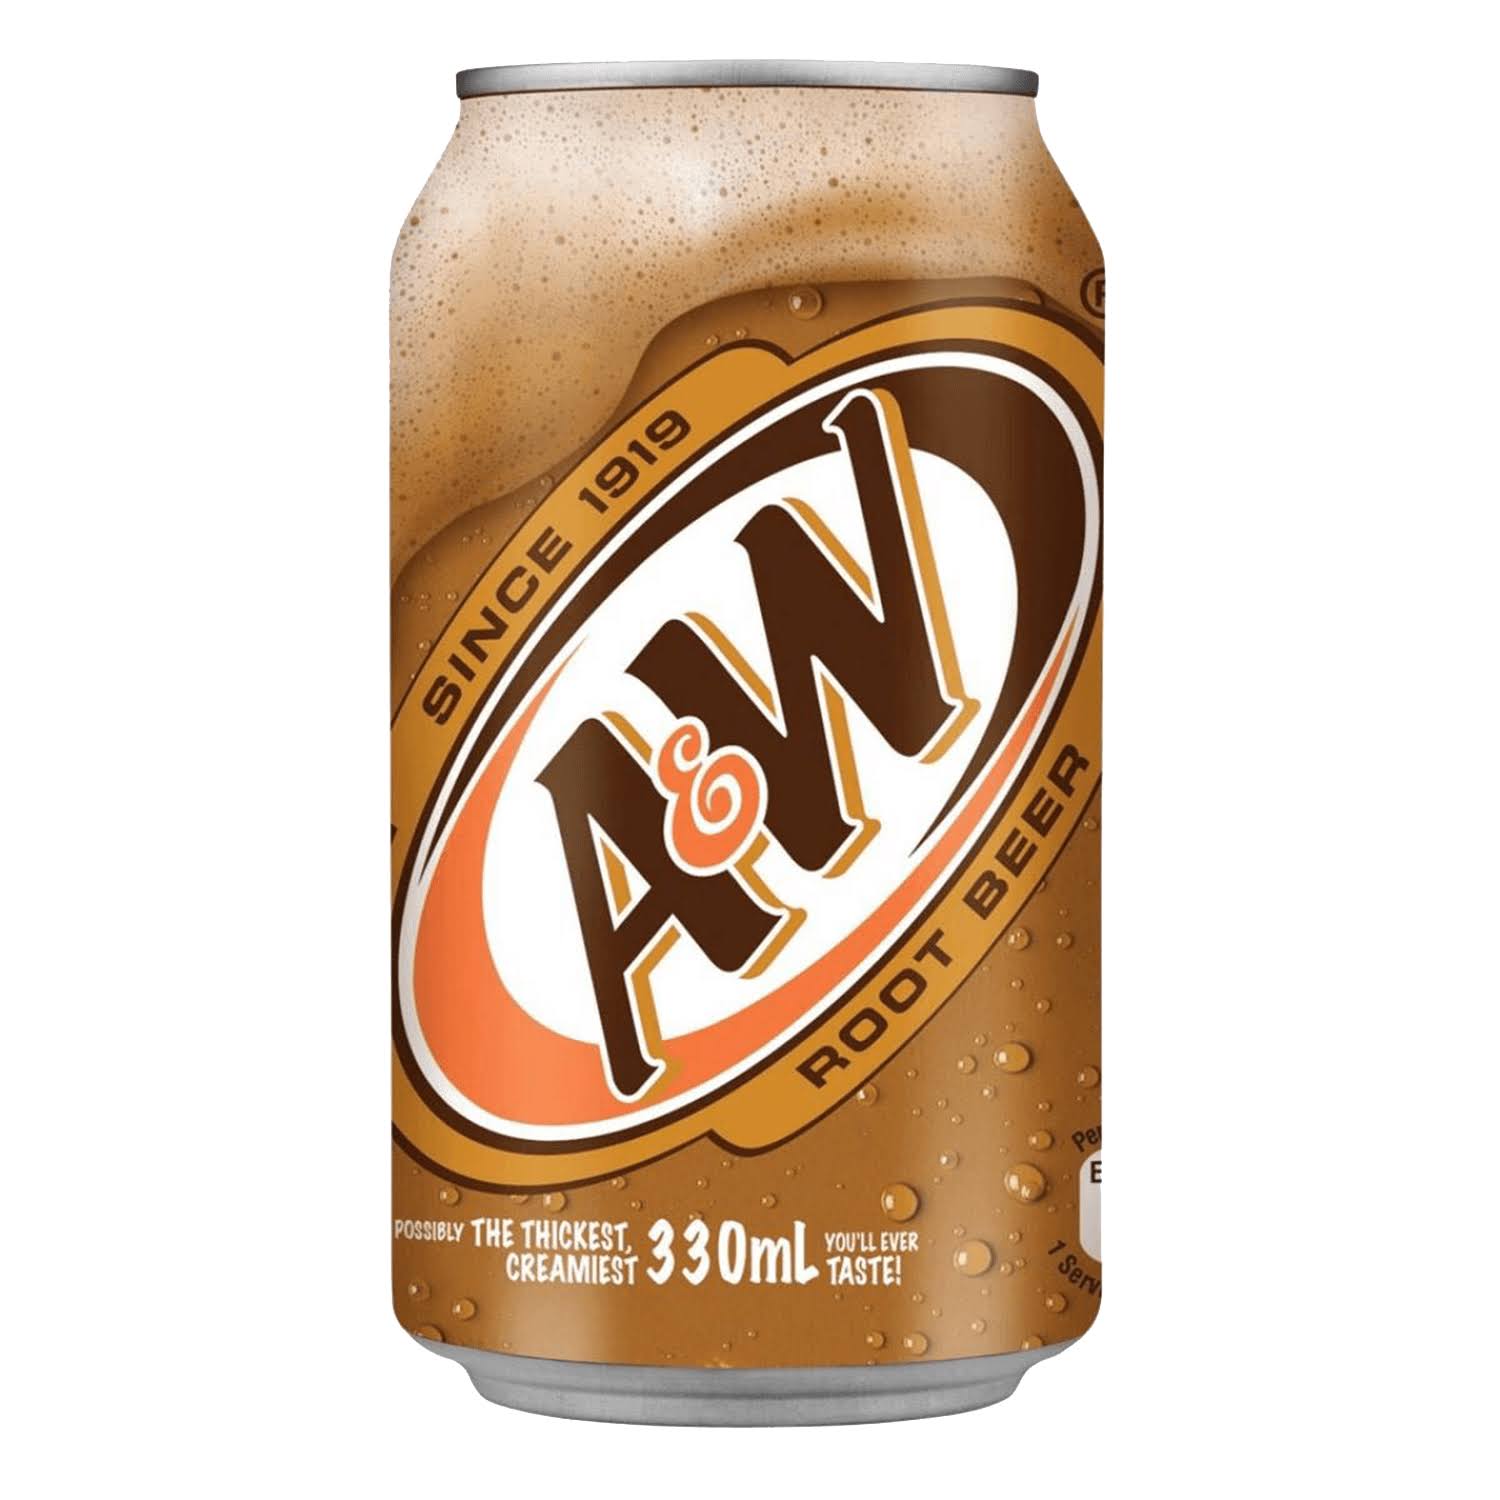 A&W Root Beer - 355ml